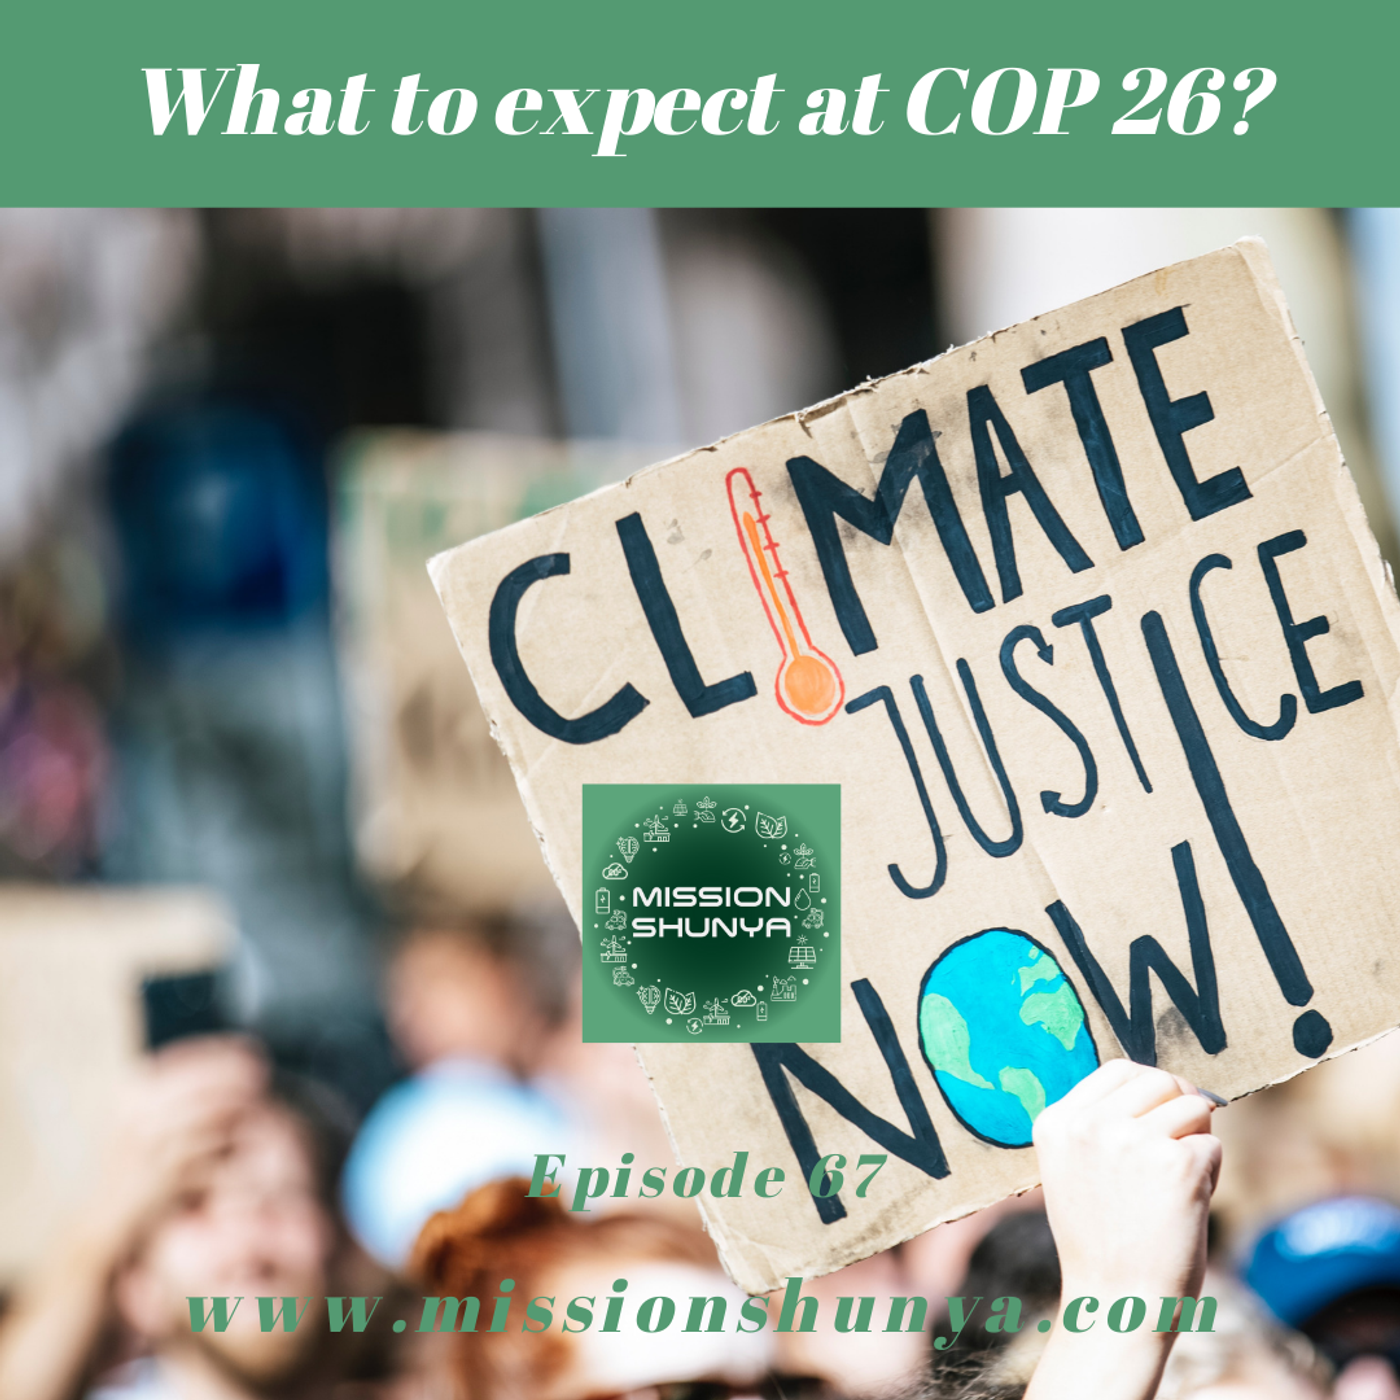 67: What to expect at COP 26?